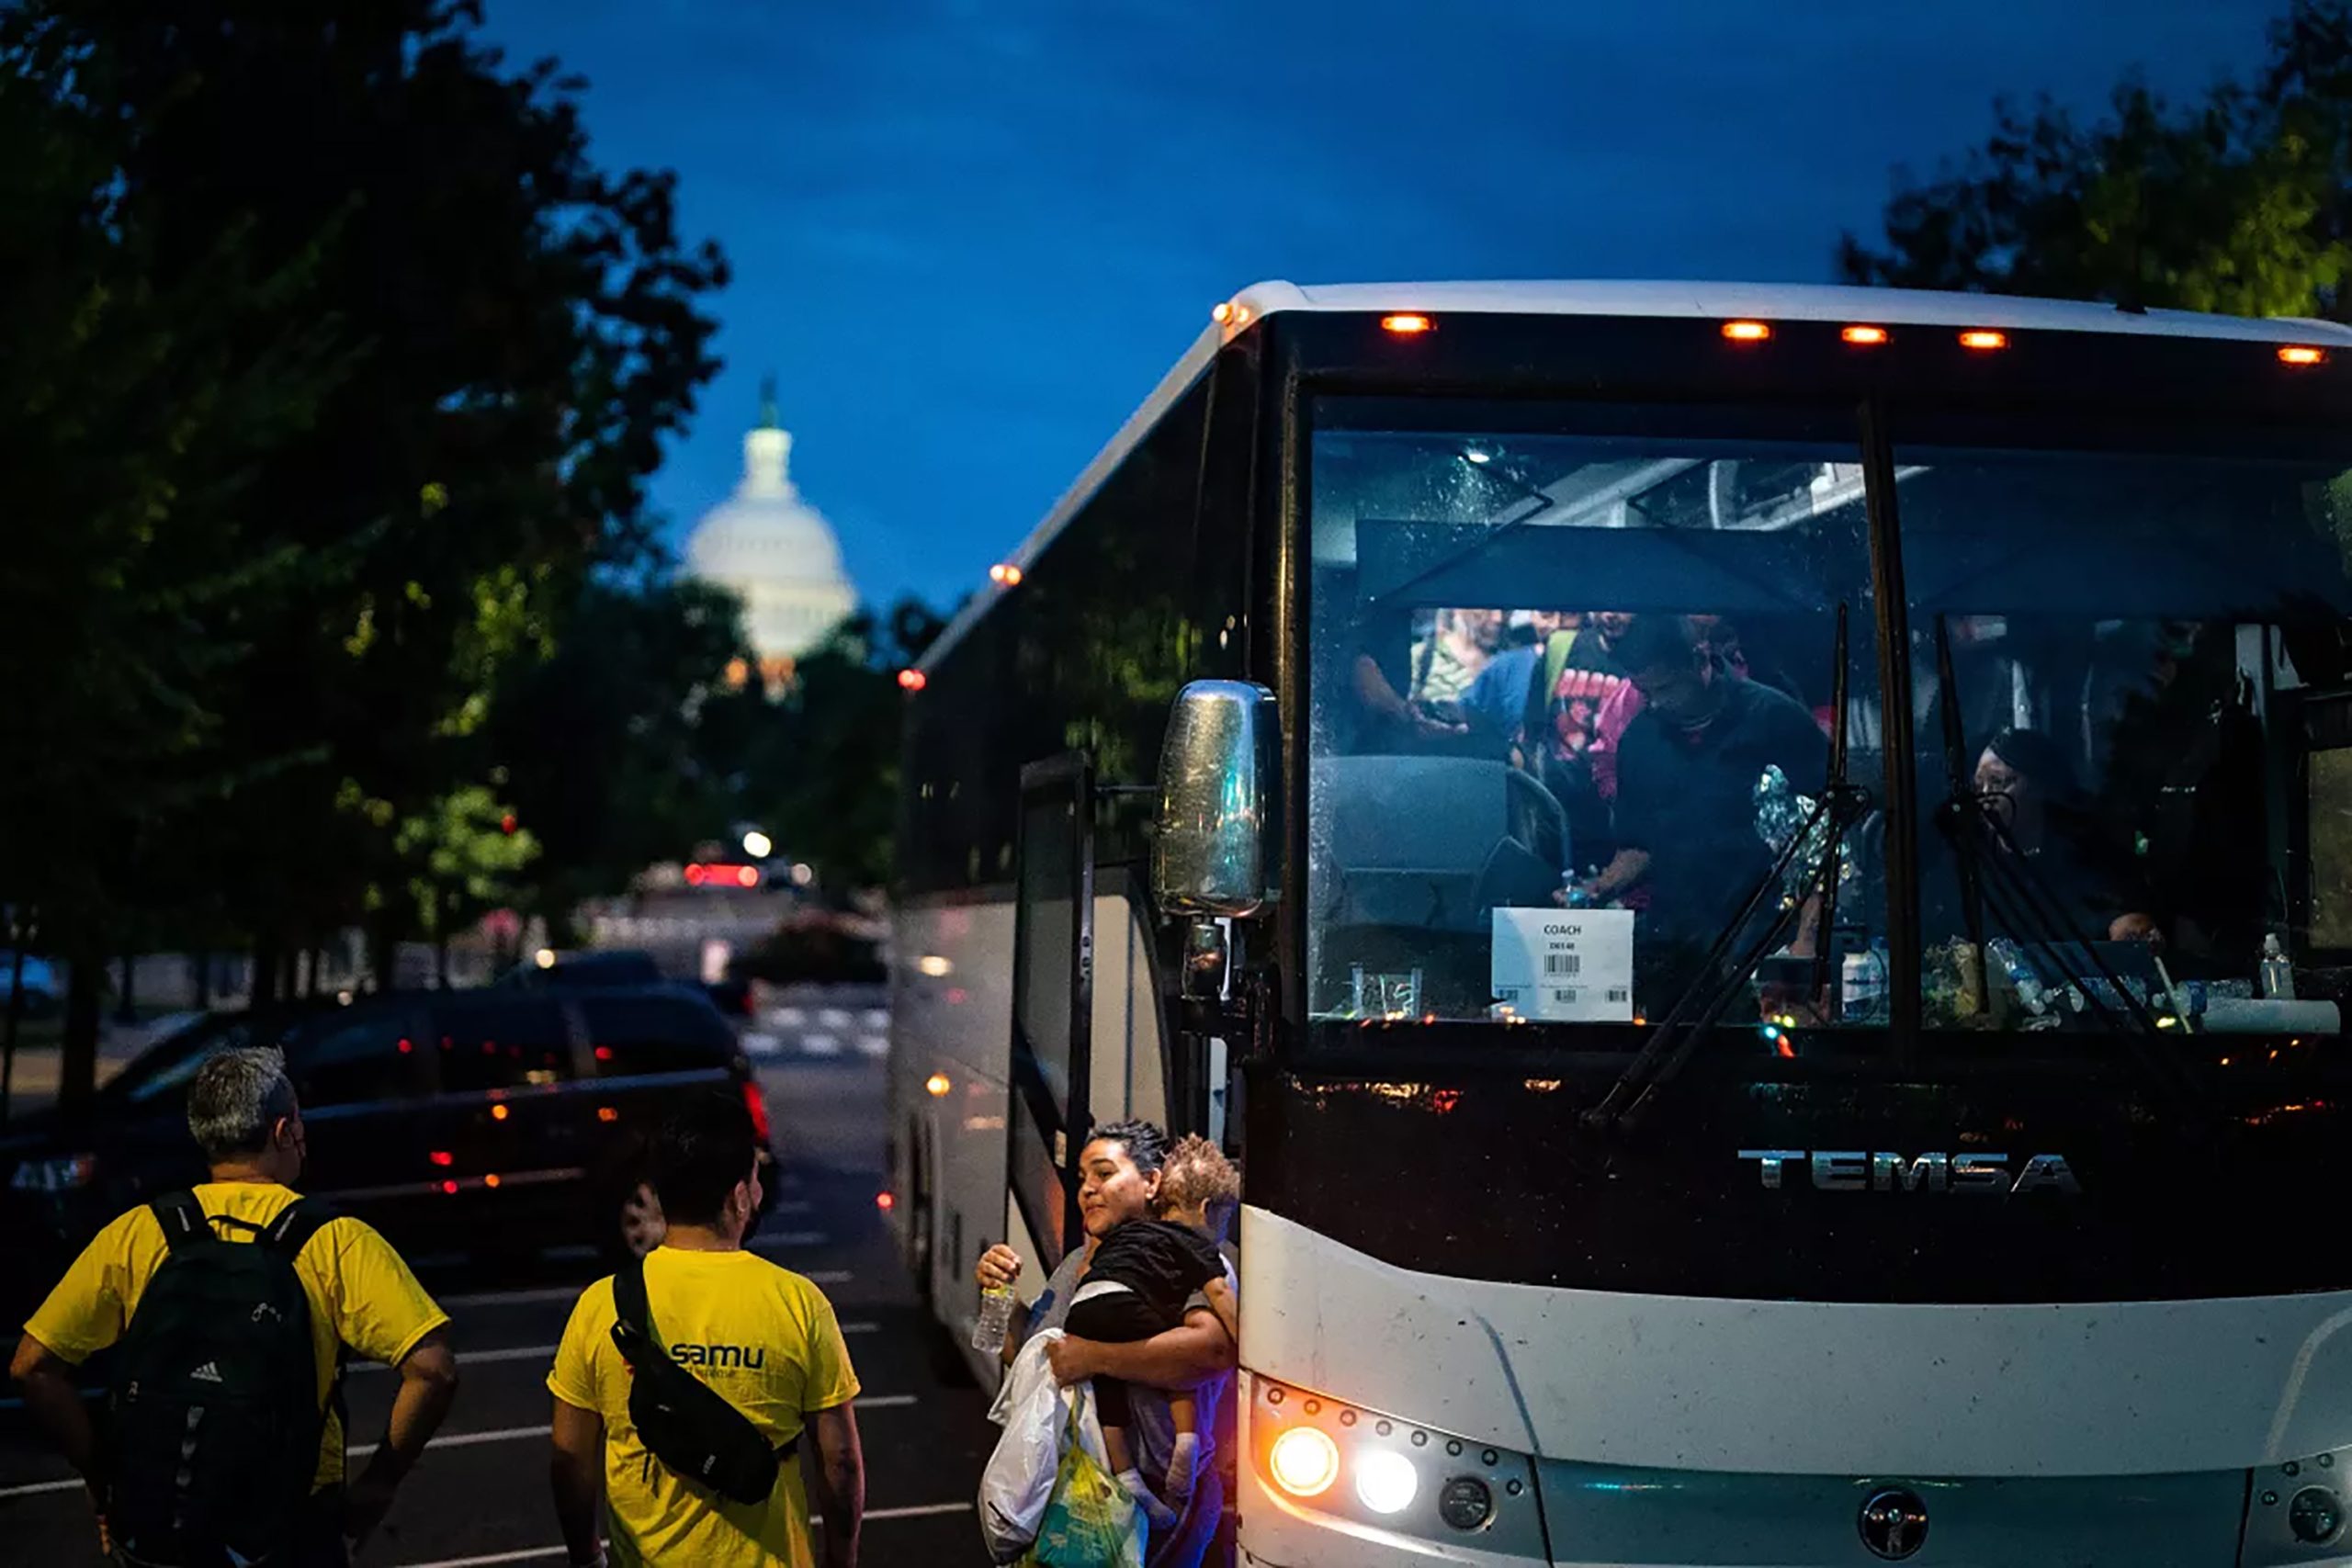 Texas Gov. Greg Abbott has ordered more than 150 buses since April to send about 4,500 migrants to Washington, D.C. Above, one of those buses arrives in August. (Kent Nishimura/Los Angeles Times/TNS)